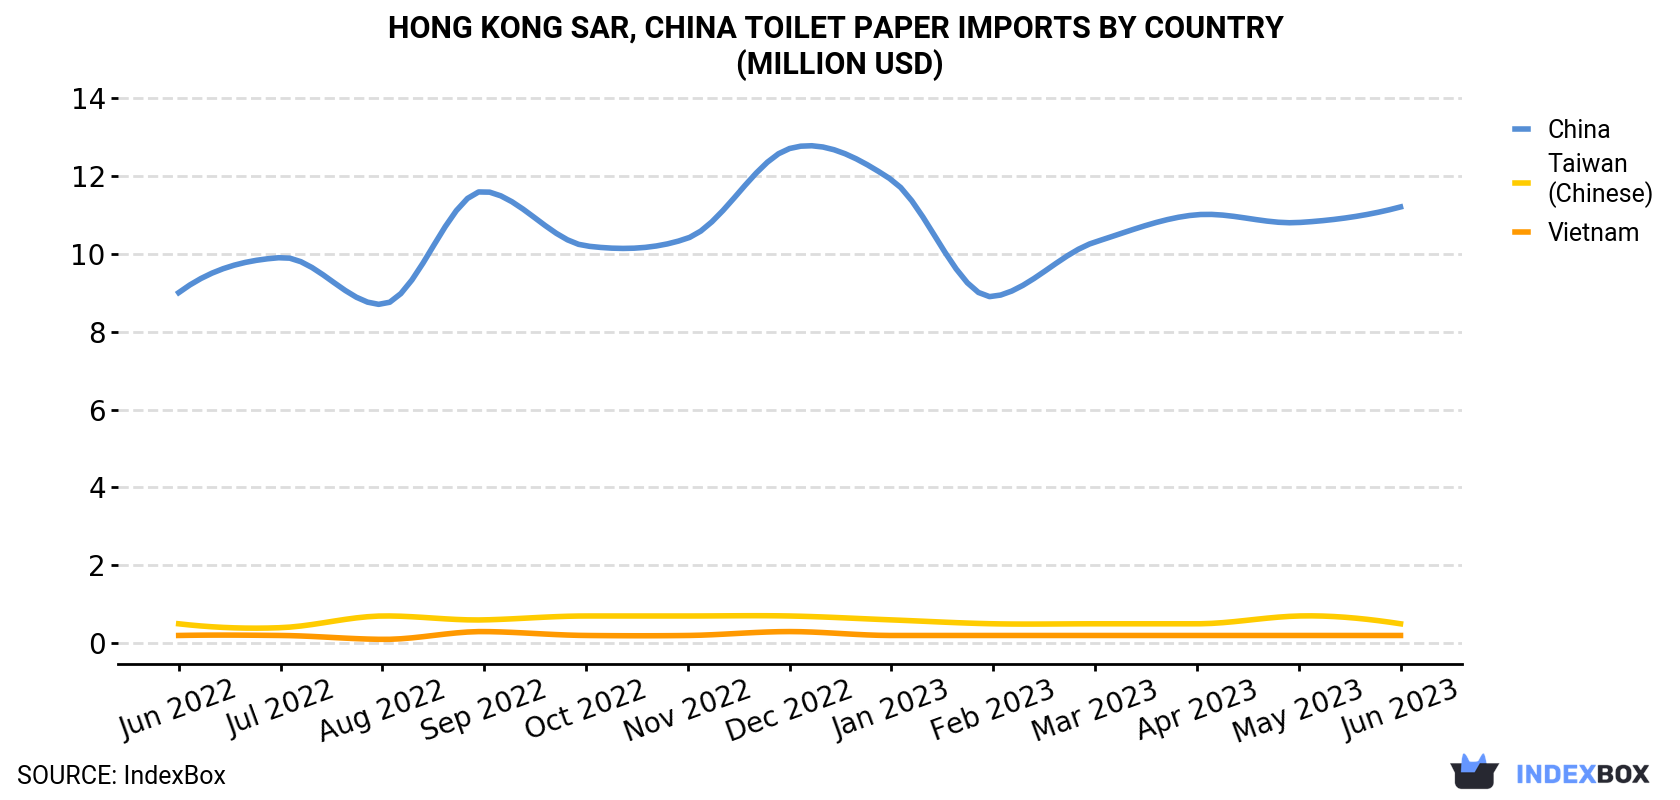 Hong Kong Toilet Paper Imports By Country (Million USD)